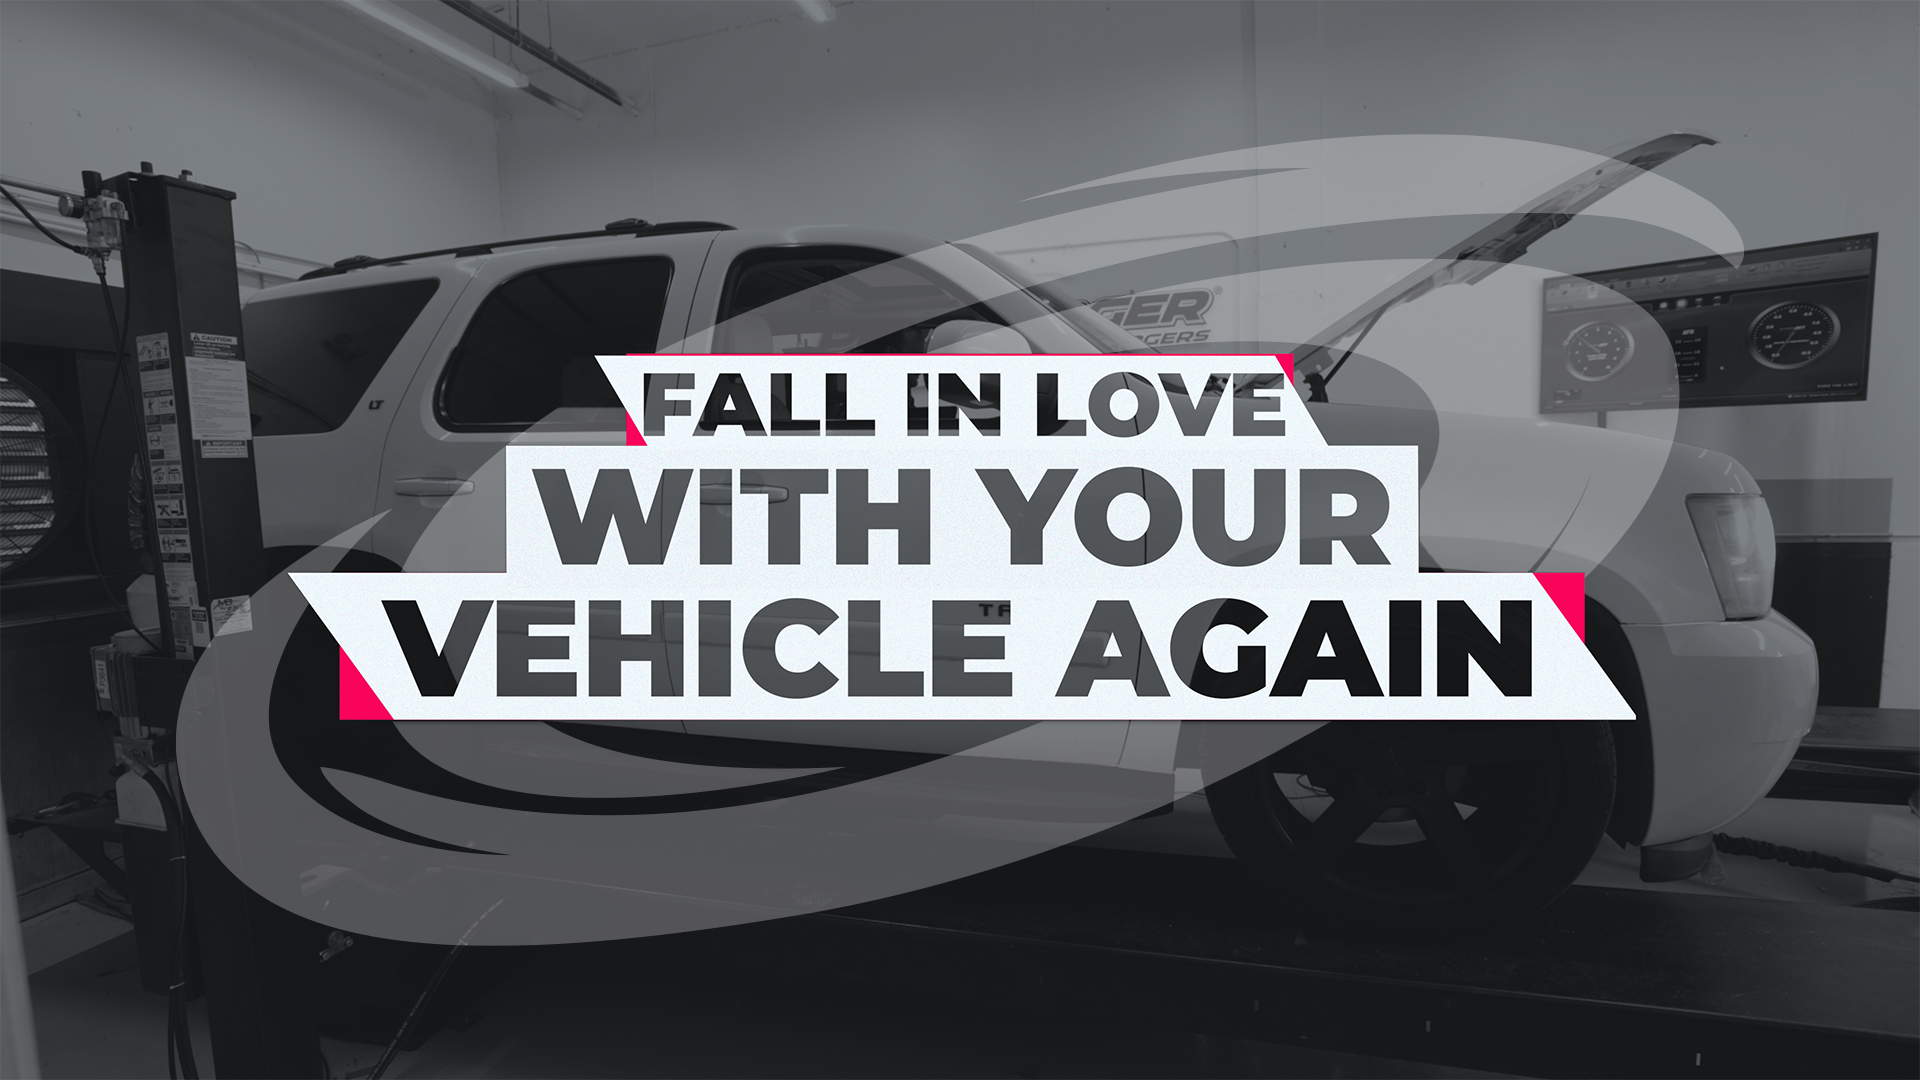 Fall In love with your vehicle